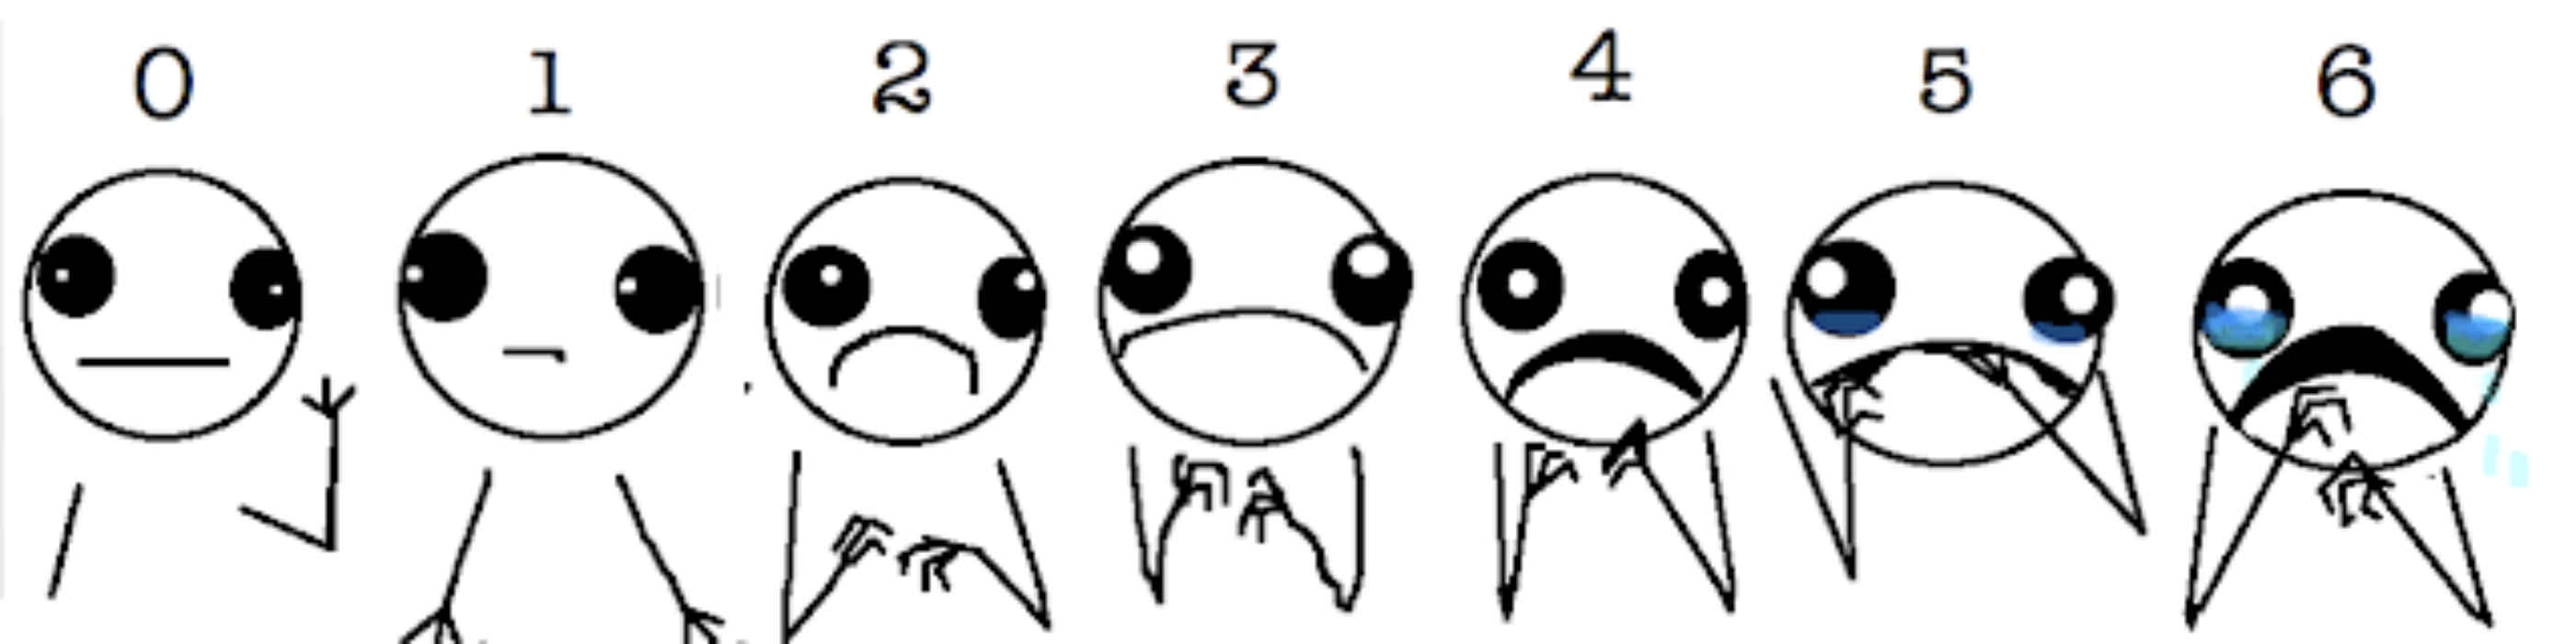 Allie's pain scale chart from 0-6 points